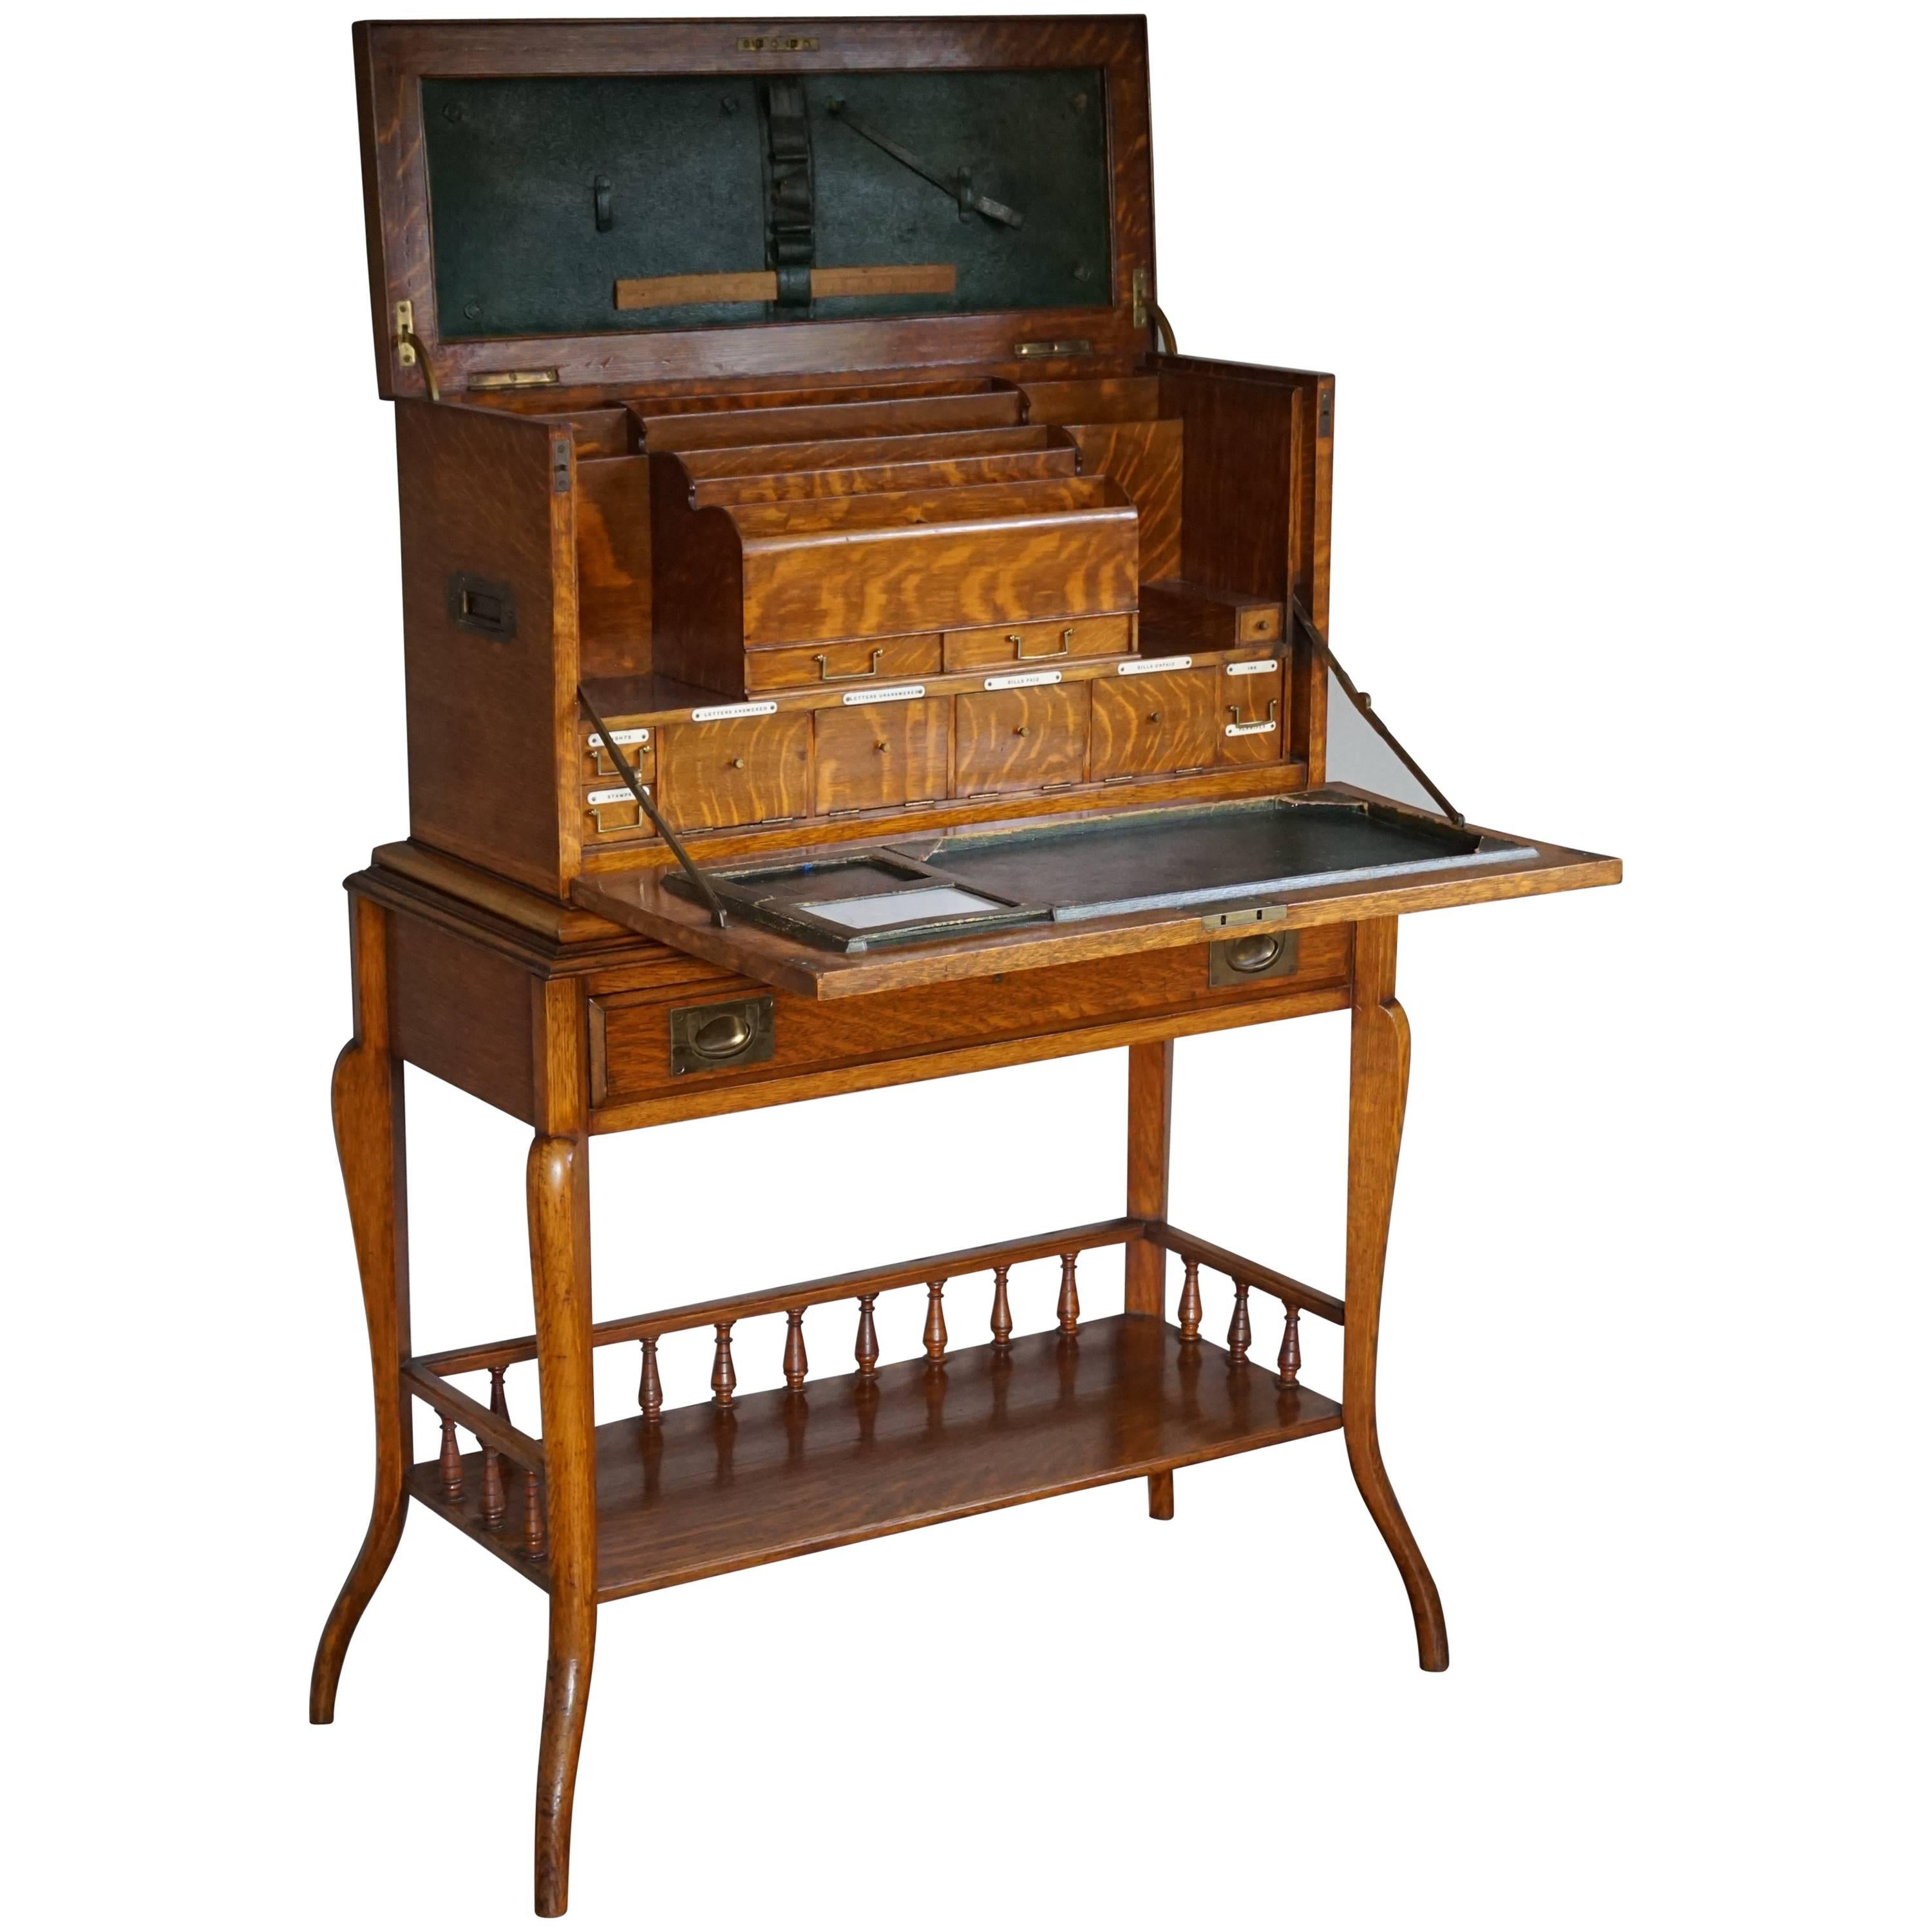 Stunning Late 19th Century Campaign or Travelers Desk Attr. to Thomas Potter For Sale